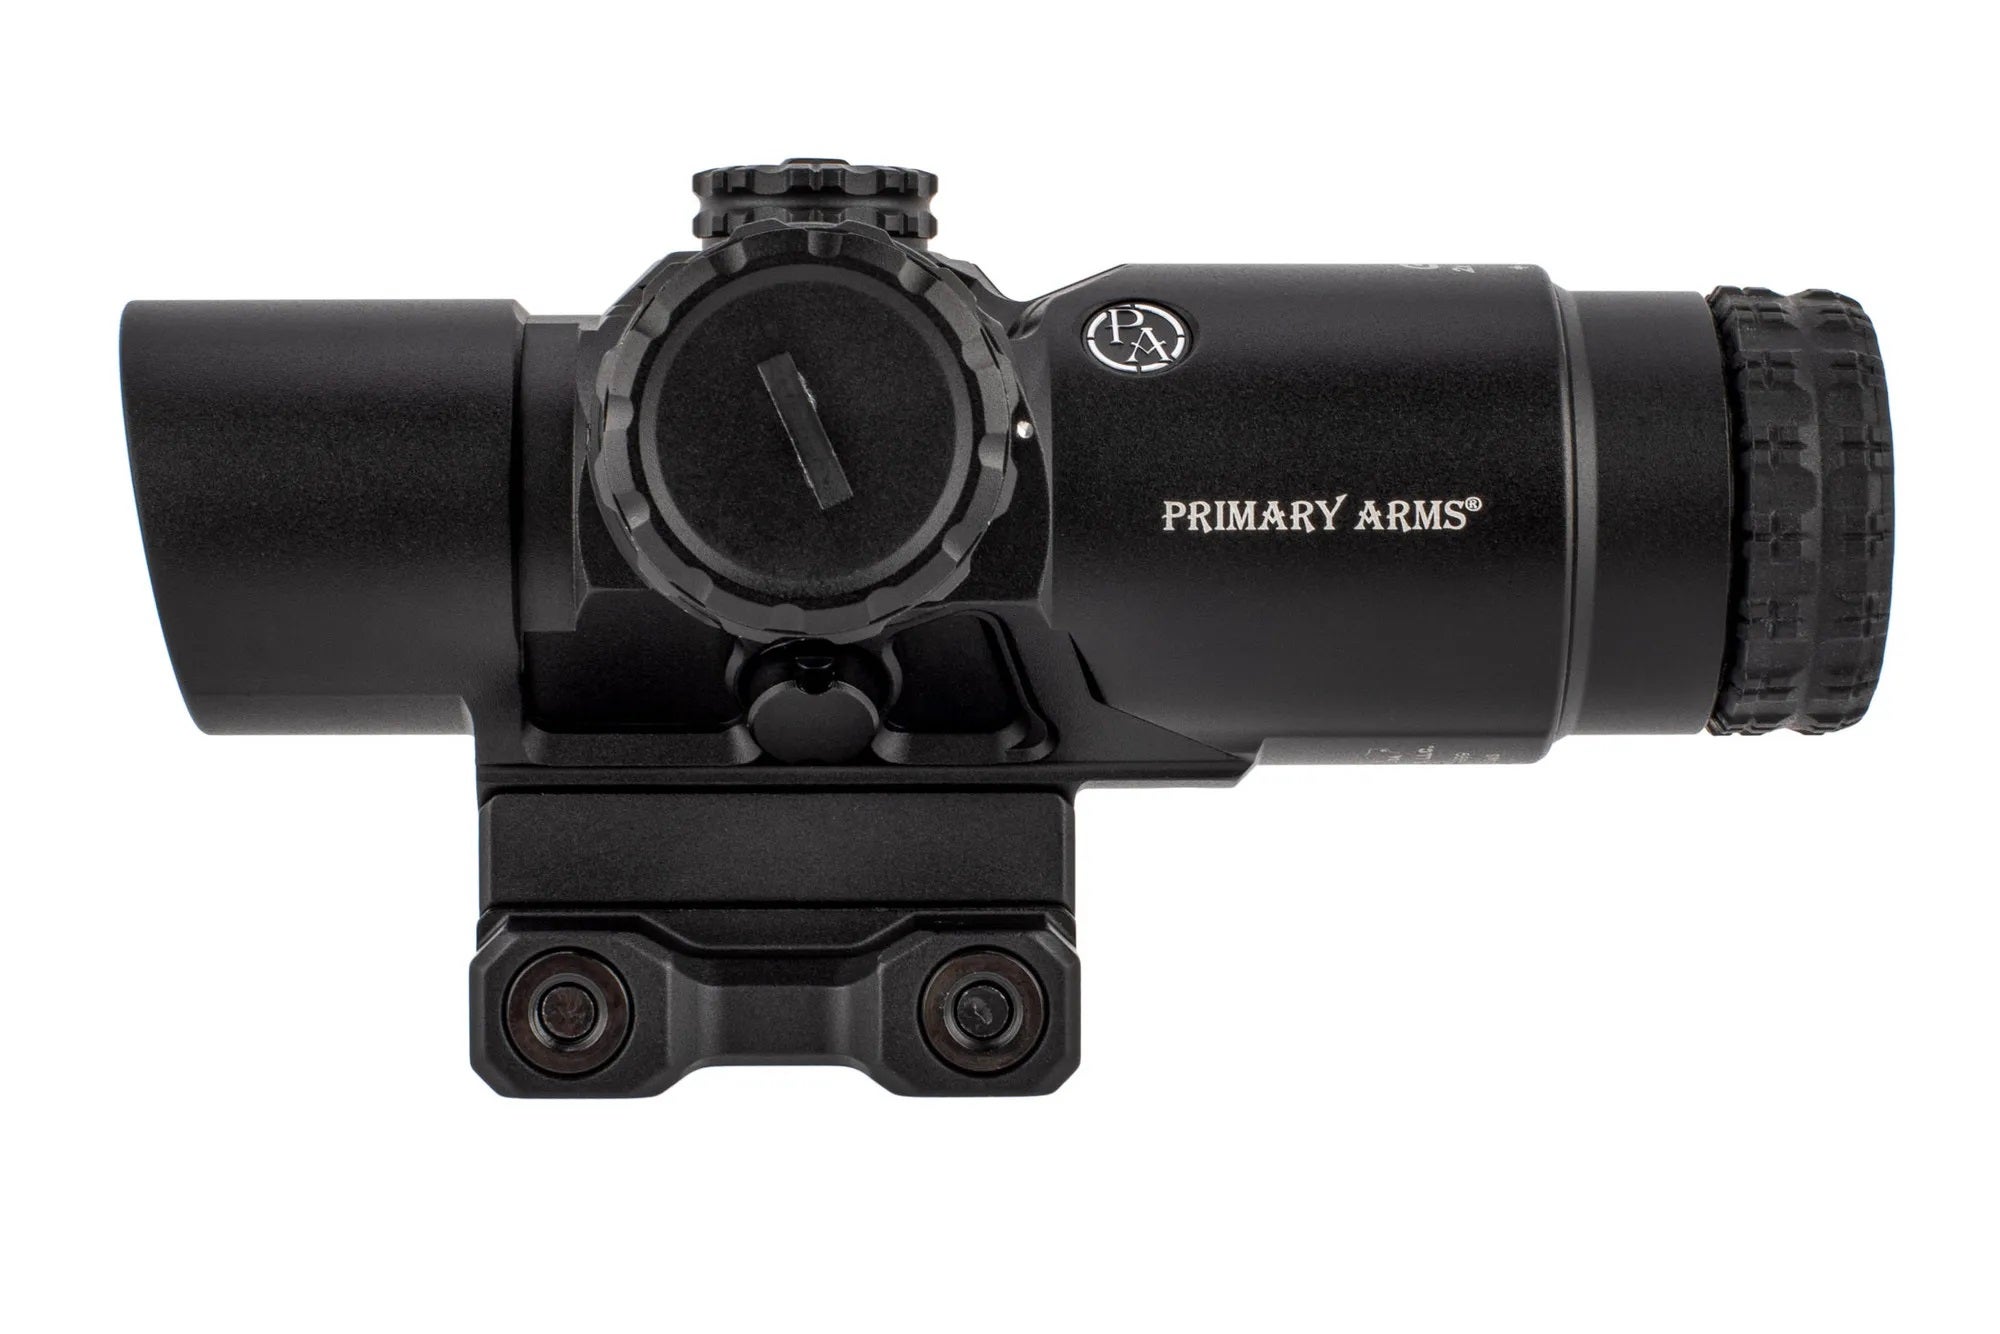 New ACSS Gemini Reticle for Primary Arms GLx 2x Prism